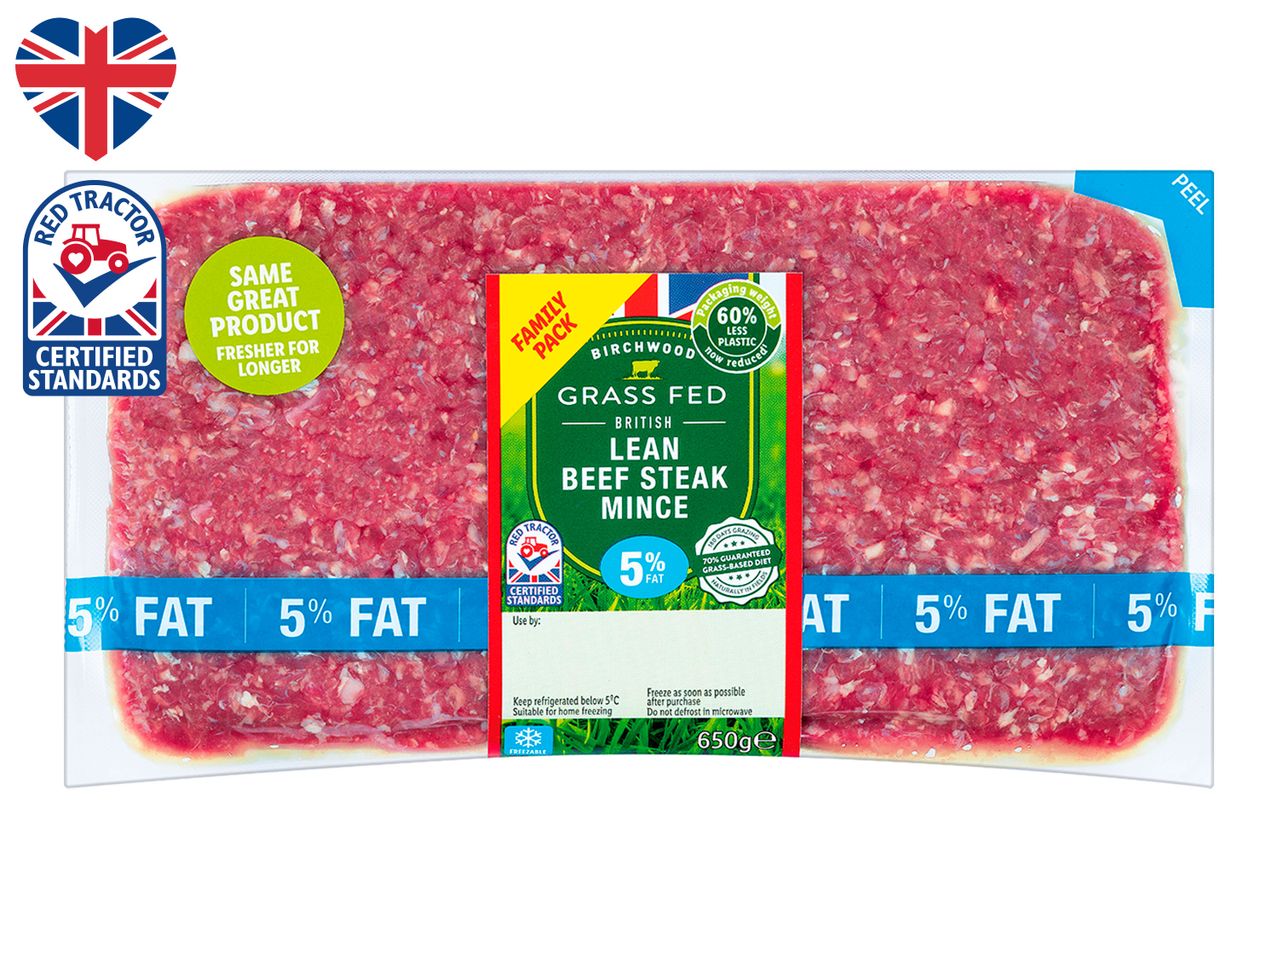 Go to full screen view: Birchwood Grass Fed British Lean Beef Steak Mince 5% Fat - Image 1